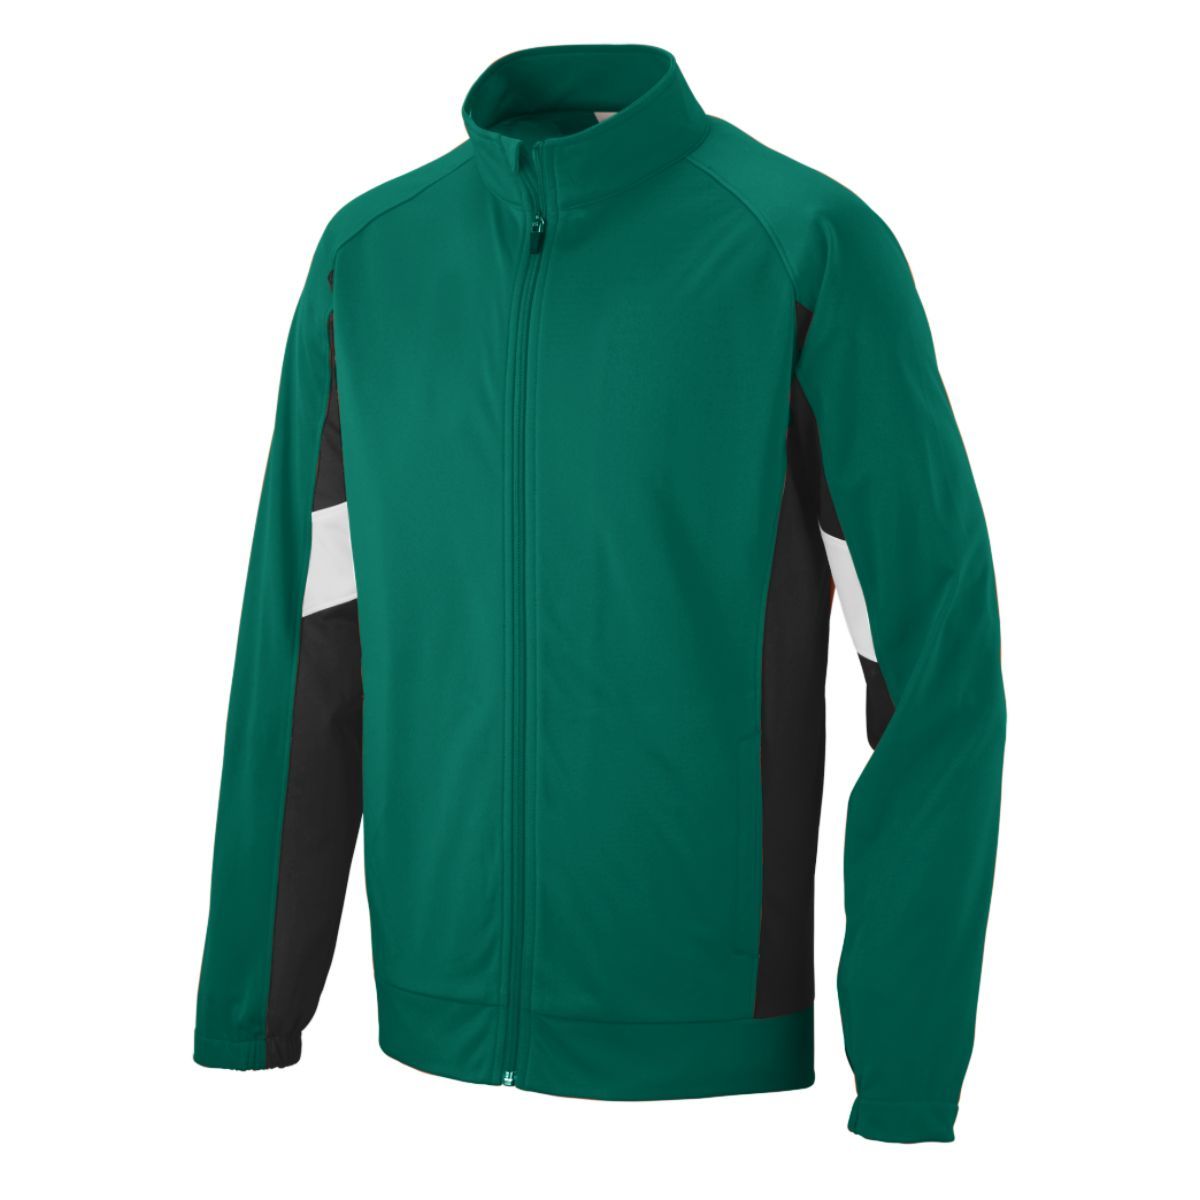 Augusta Sportswear Tour De Force Jacket in Dark Green/Black/White  -Part of the Adult, Adult-Jacket, Augusta-Products, Outerwear product lines at KanaleyCreations.com